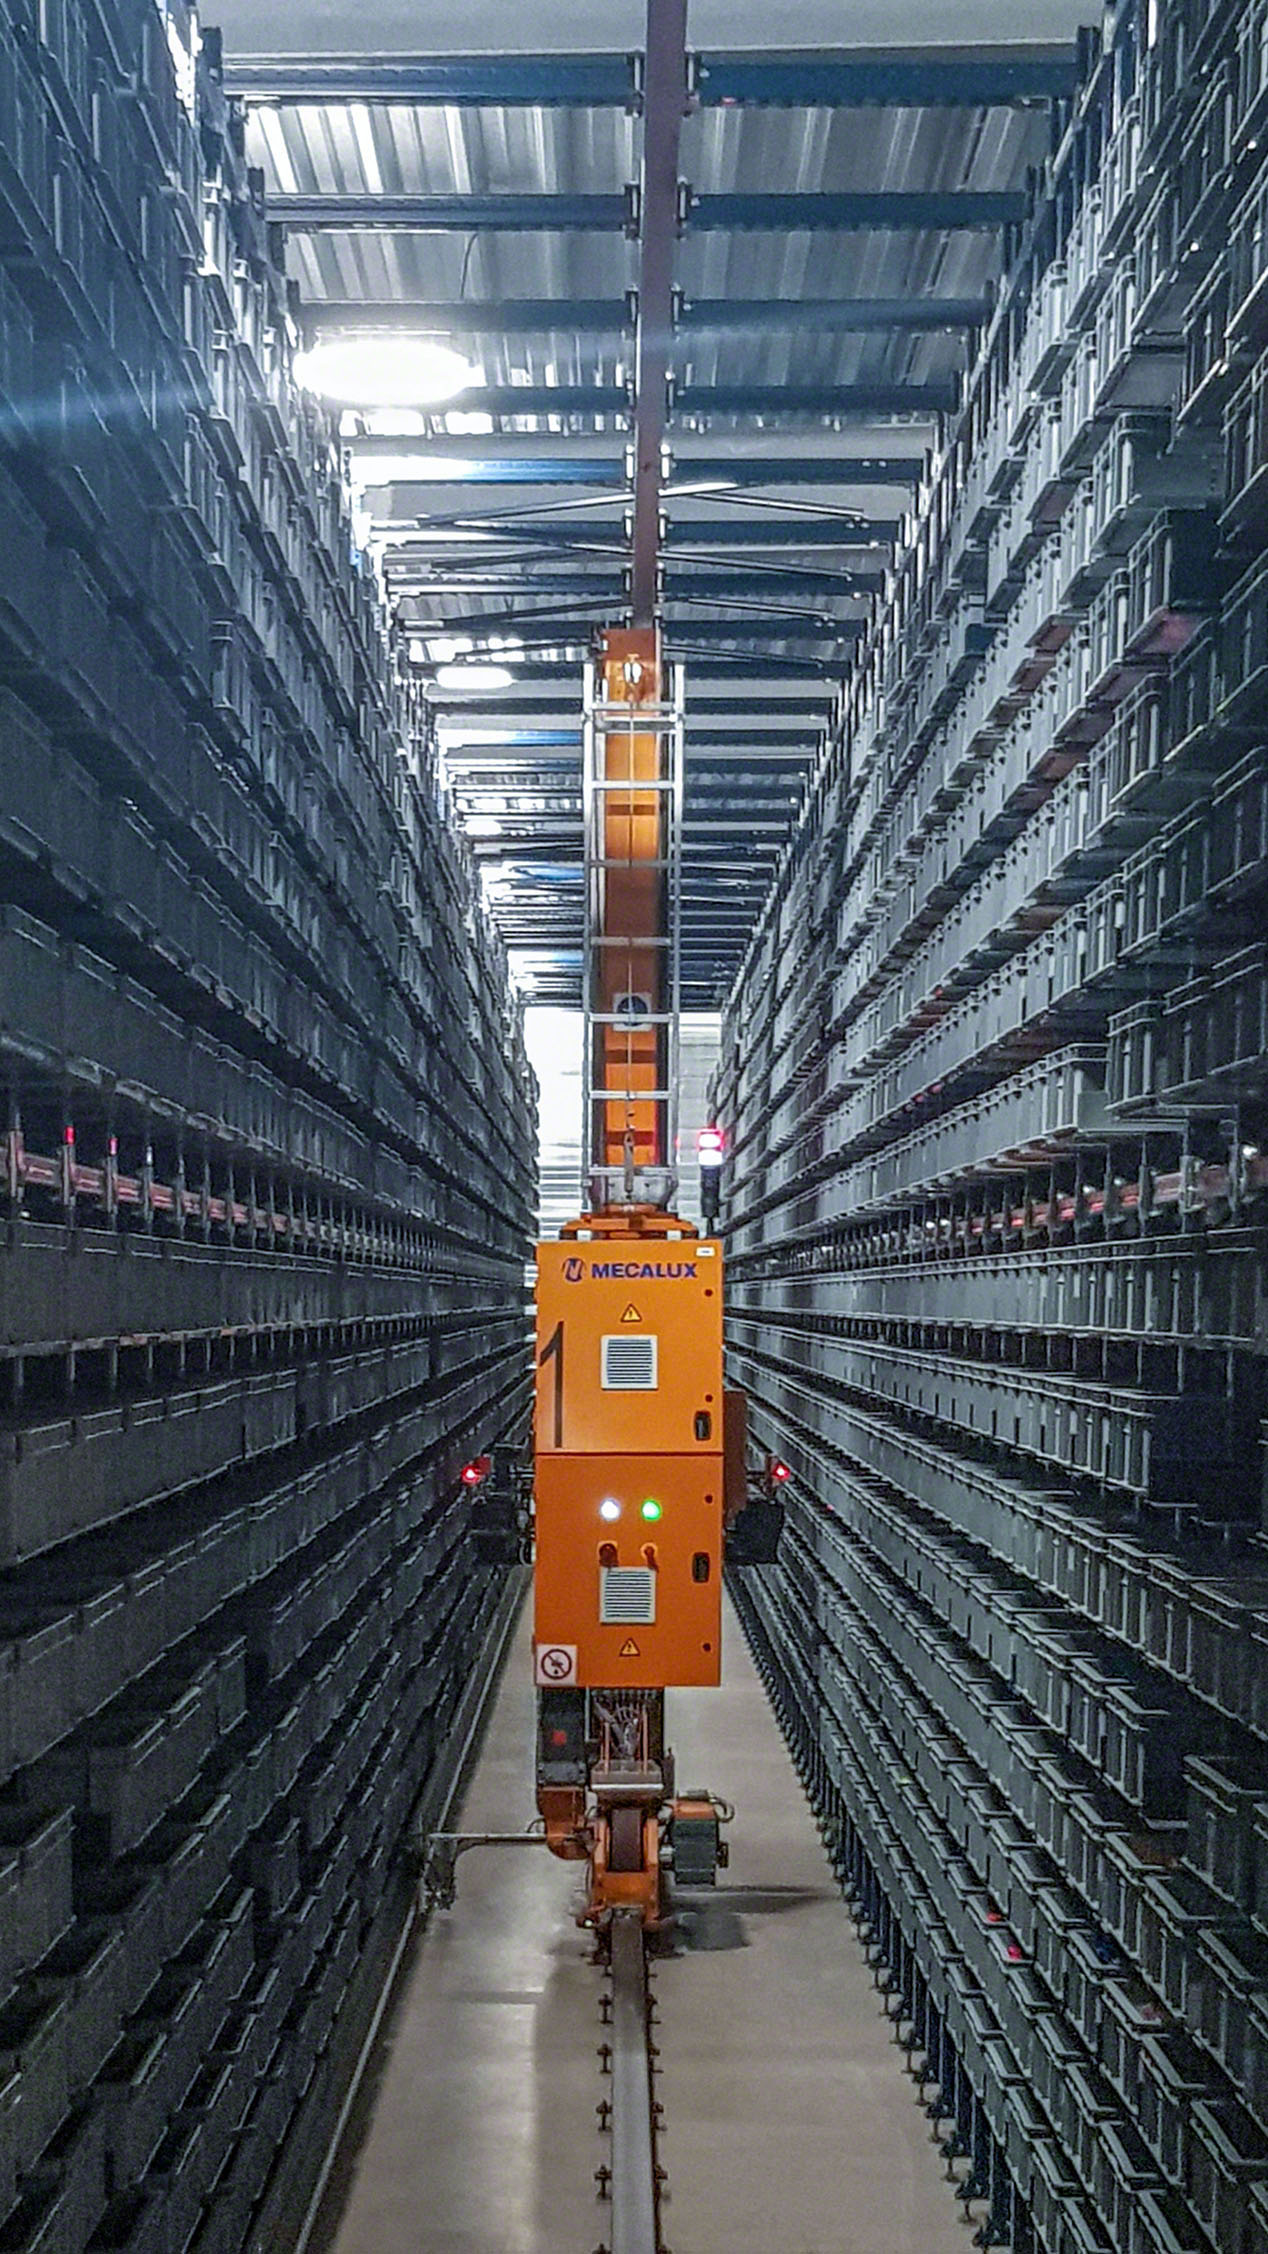 Automated installation for 7,800 boxes containing toy parts